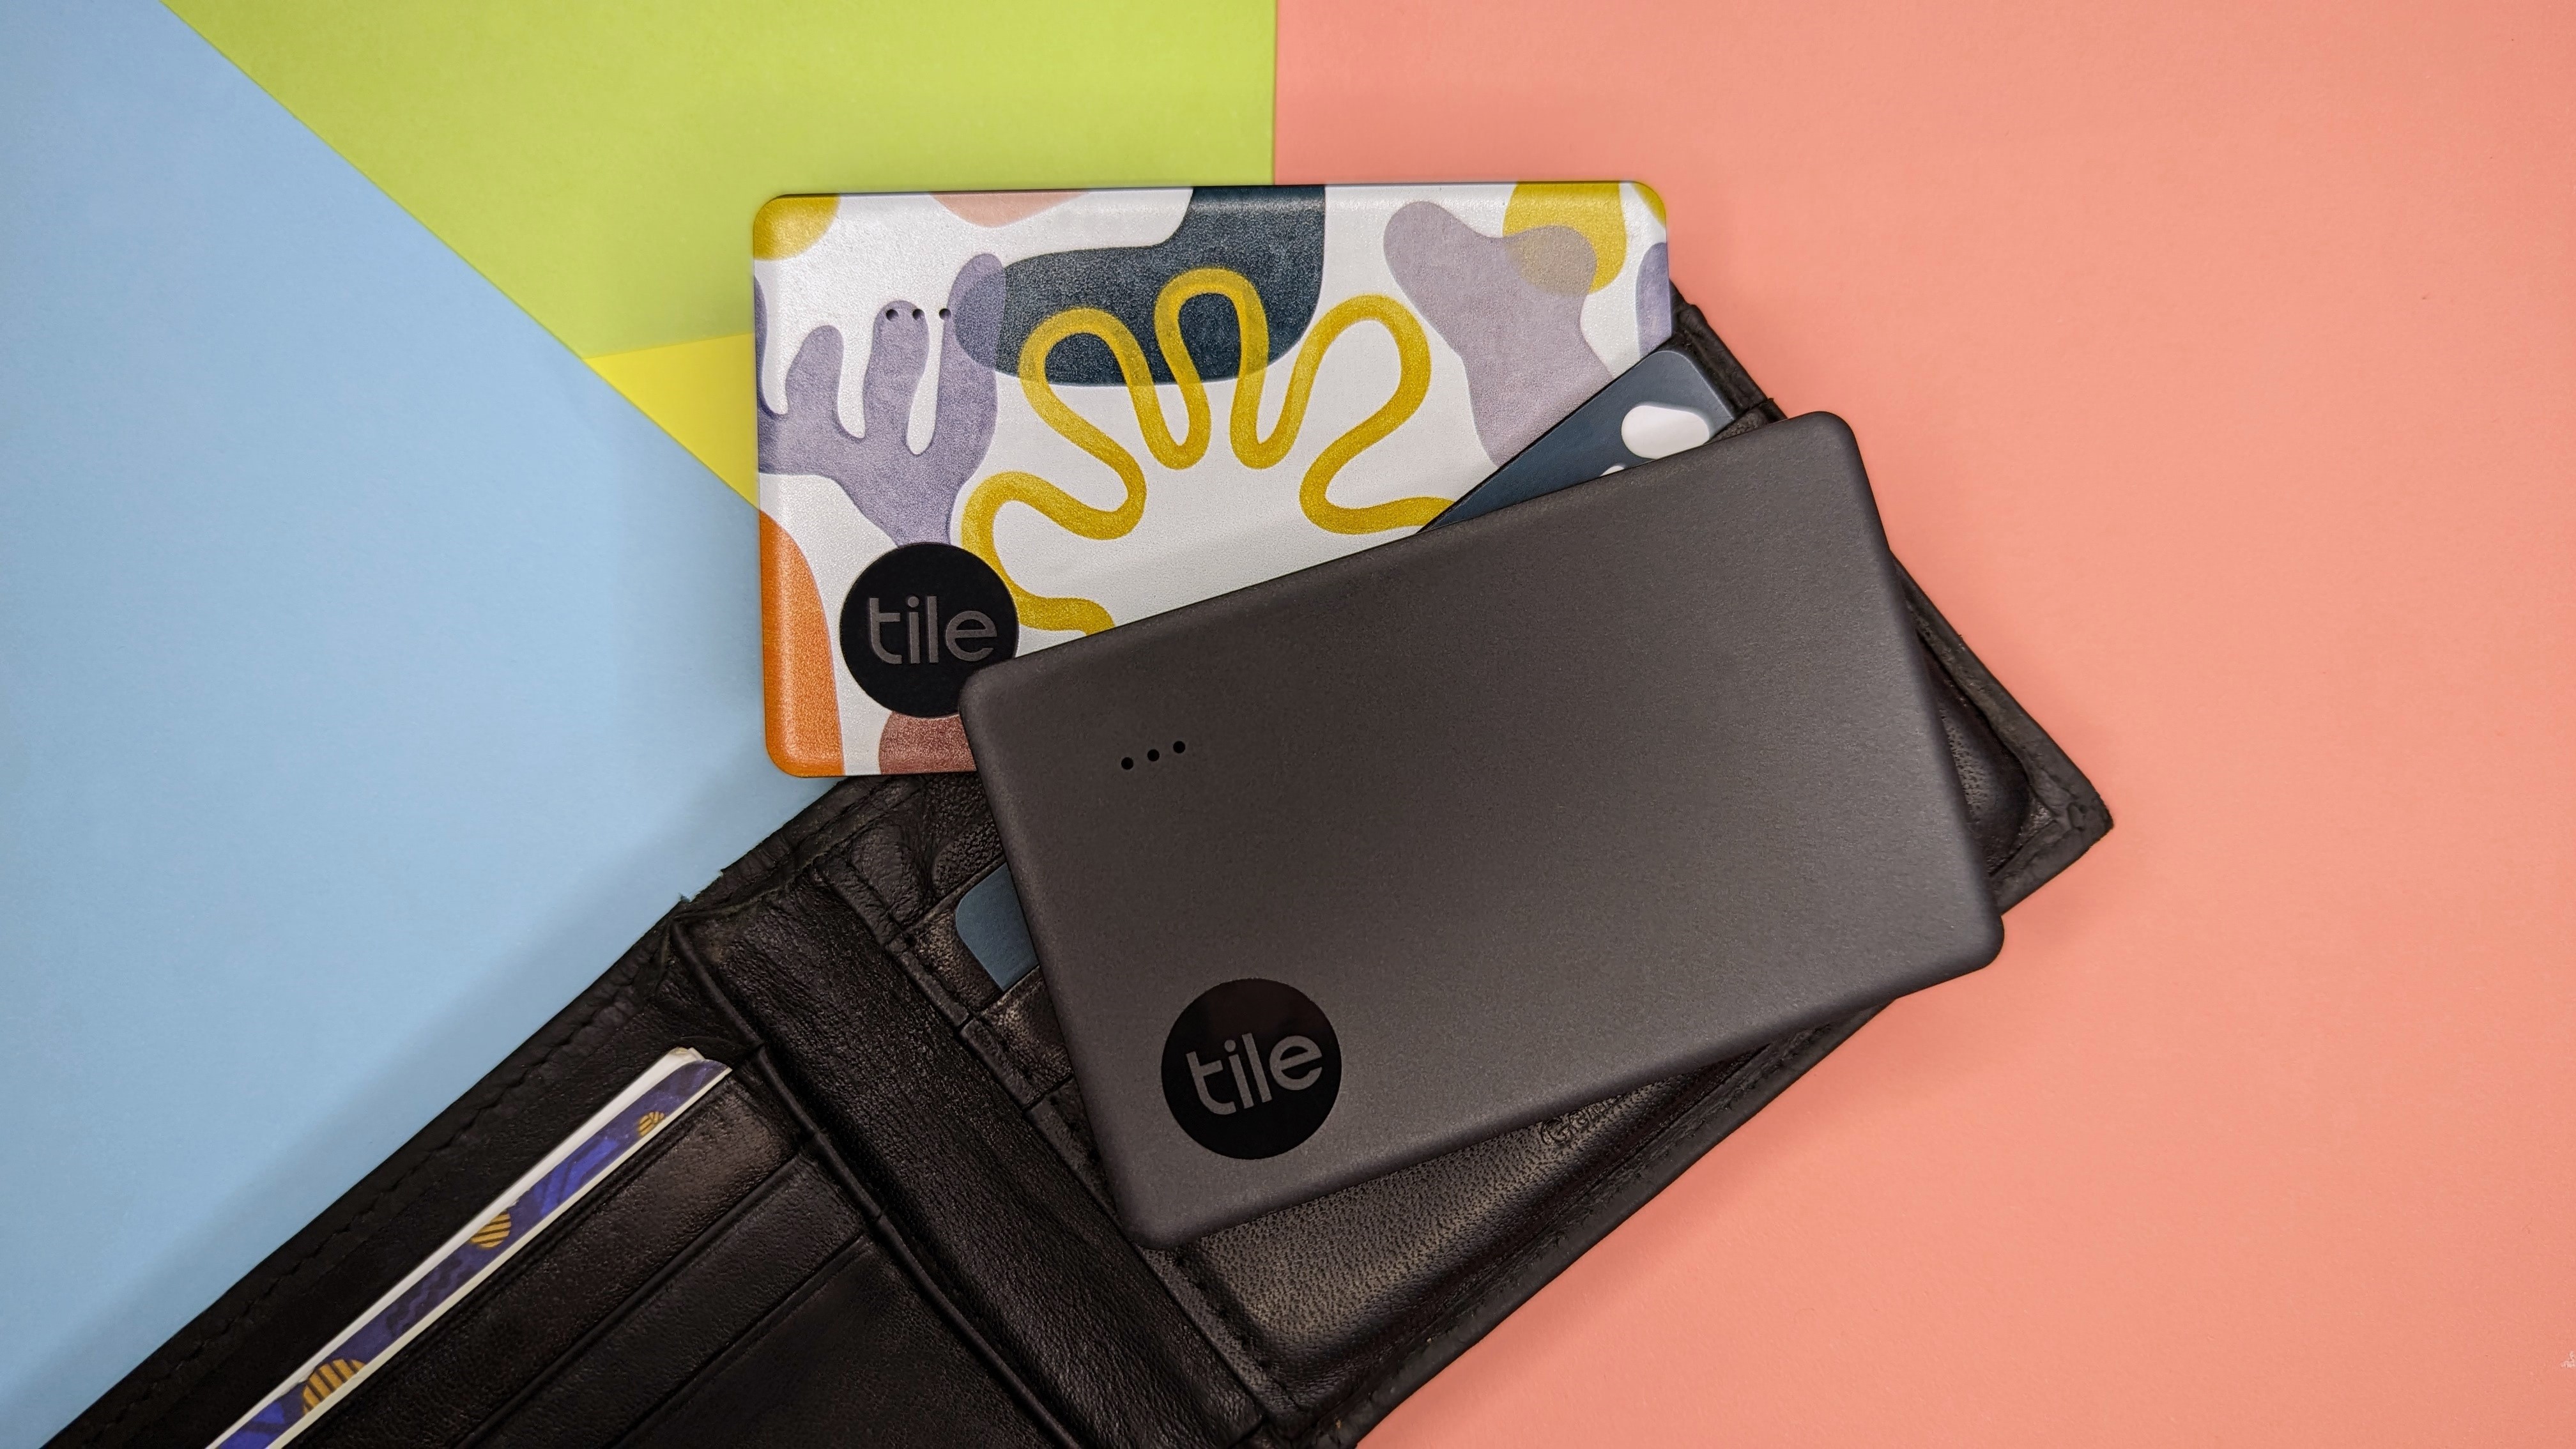 Tile Slim Bluetooth trackers inside a leather wallet.